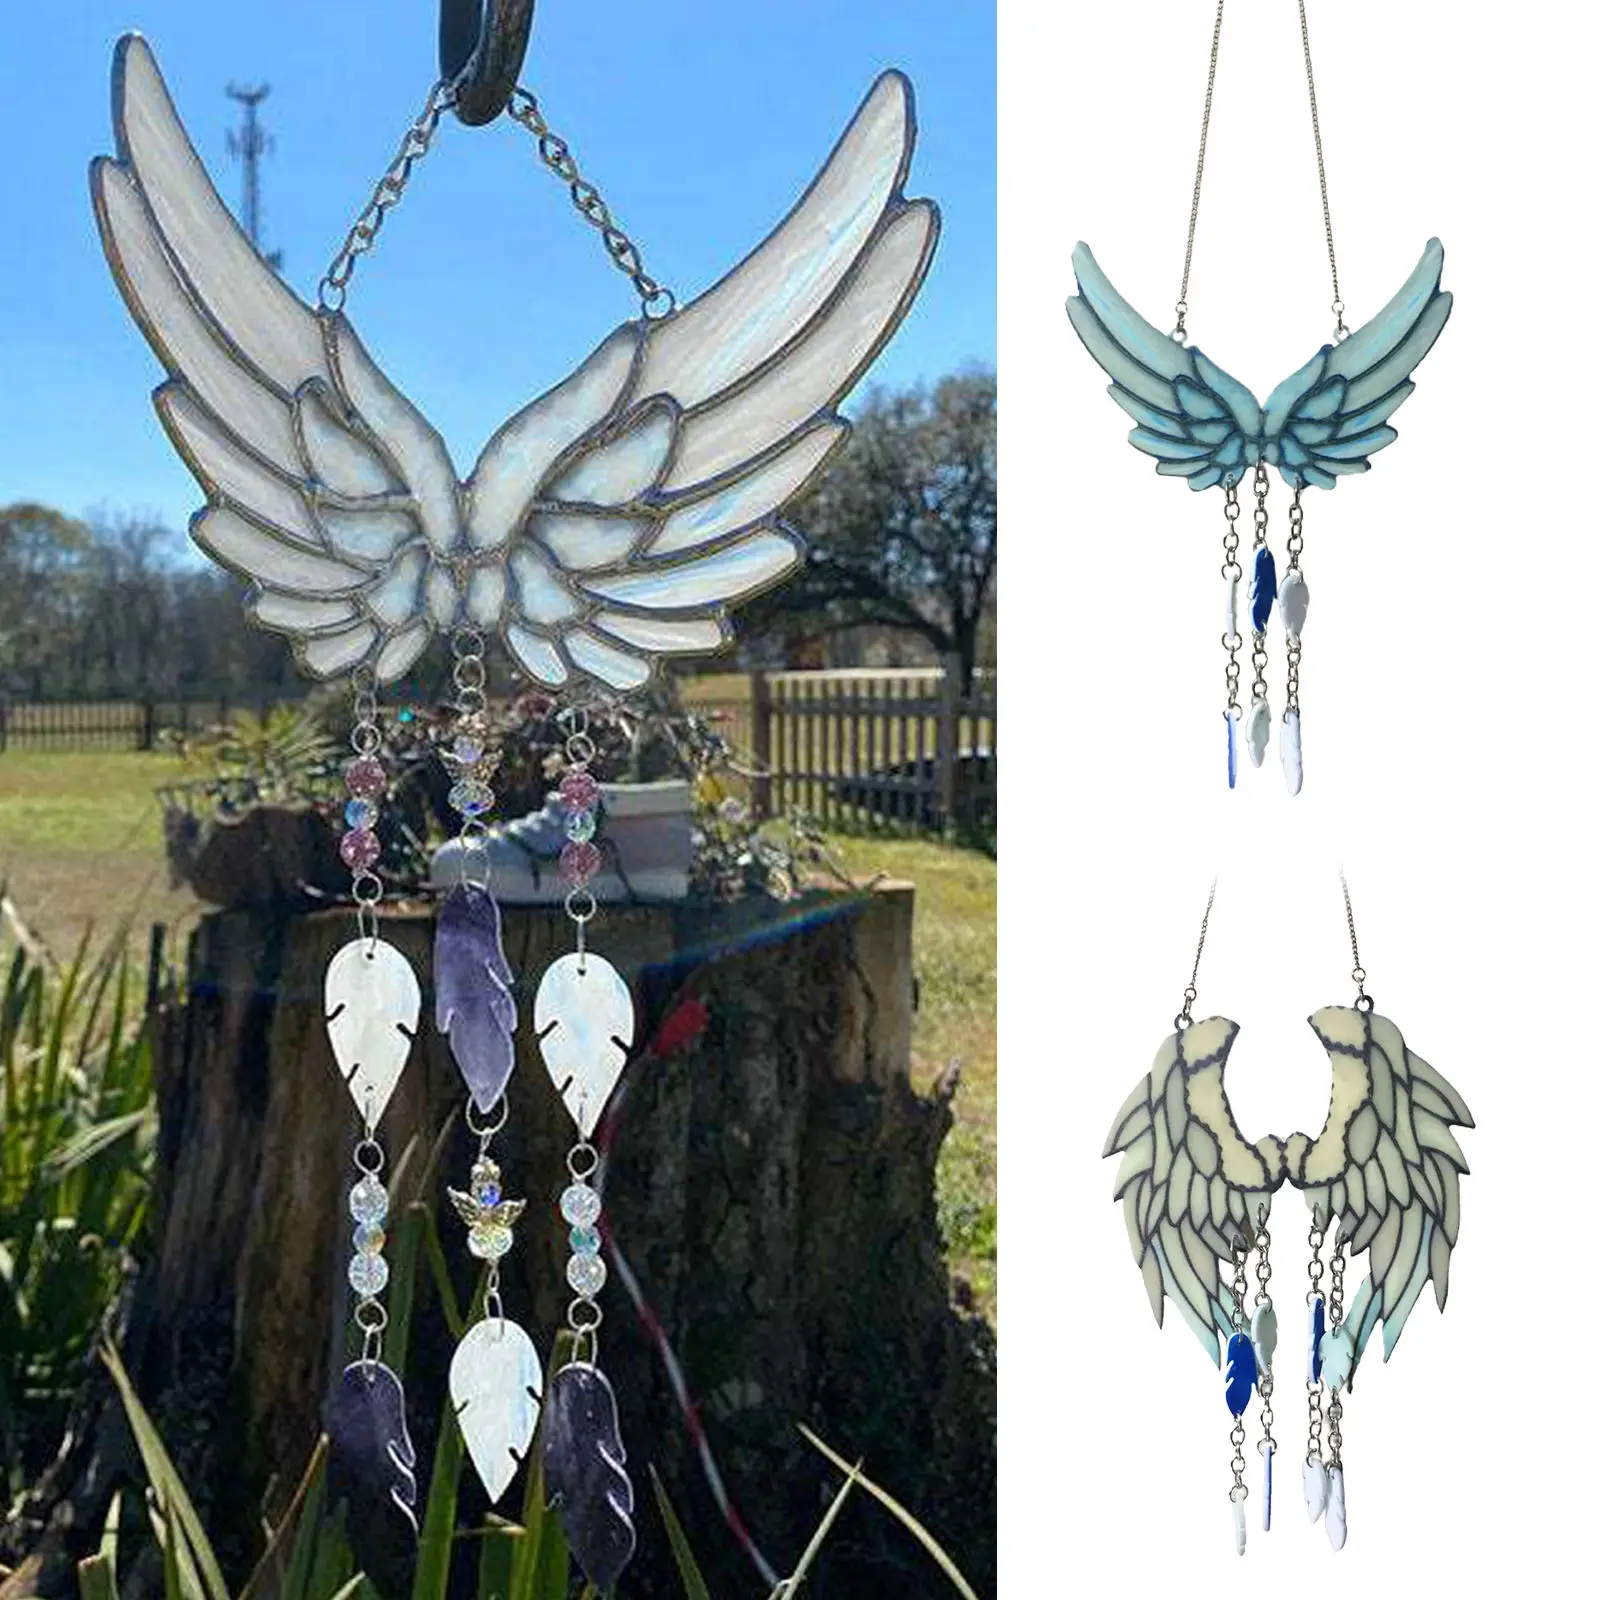 Acrylic Angel Wind Chimes  Pendant Gift Garden Home Porch Window ing Decor Yard Outdoor Decoration